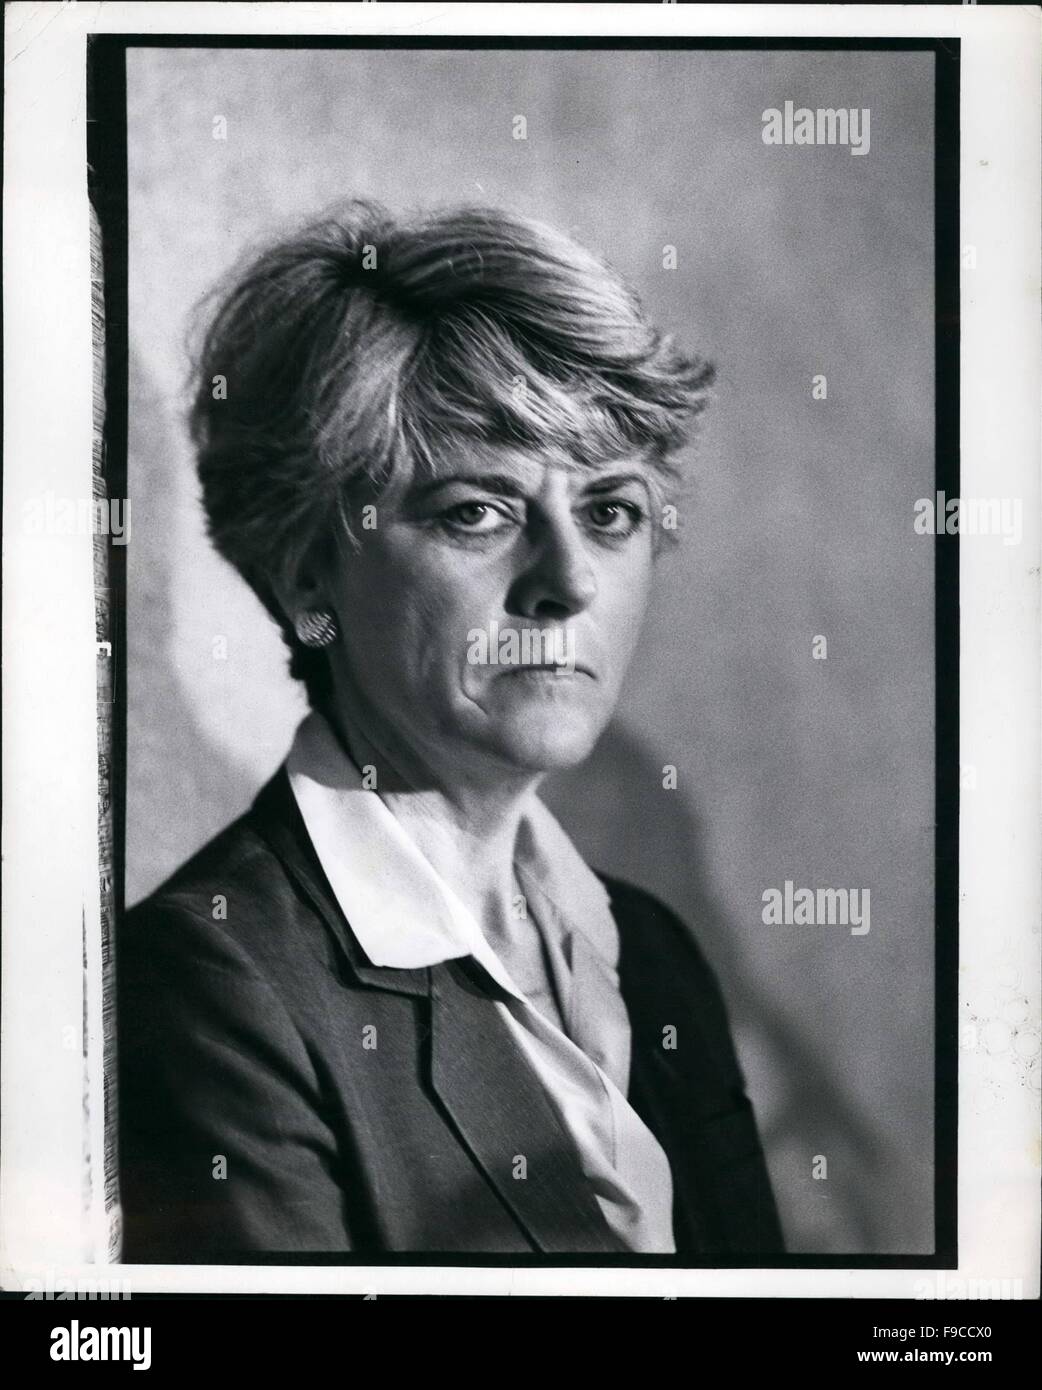 GERALDINE FERRARO (Aug. 26, 1935 - Mar. 26, 2011) was an American attorney, a Democratic Party politician, and a member of the United States House of Representatives. She was the first female vice presidential candidate representing a major American political party. PICTURED: GERALDINE FERRARO in the 1980's, location unknown. © Keystone Pictures USA/ZUMAPRESS.com/Alamy Live News Stock Photo